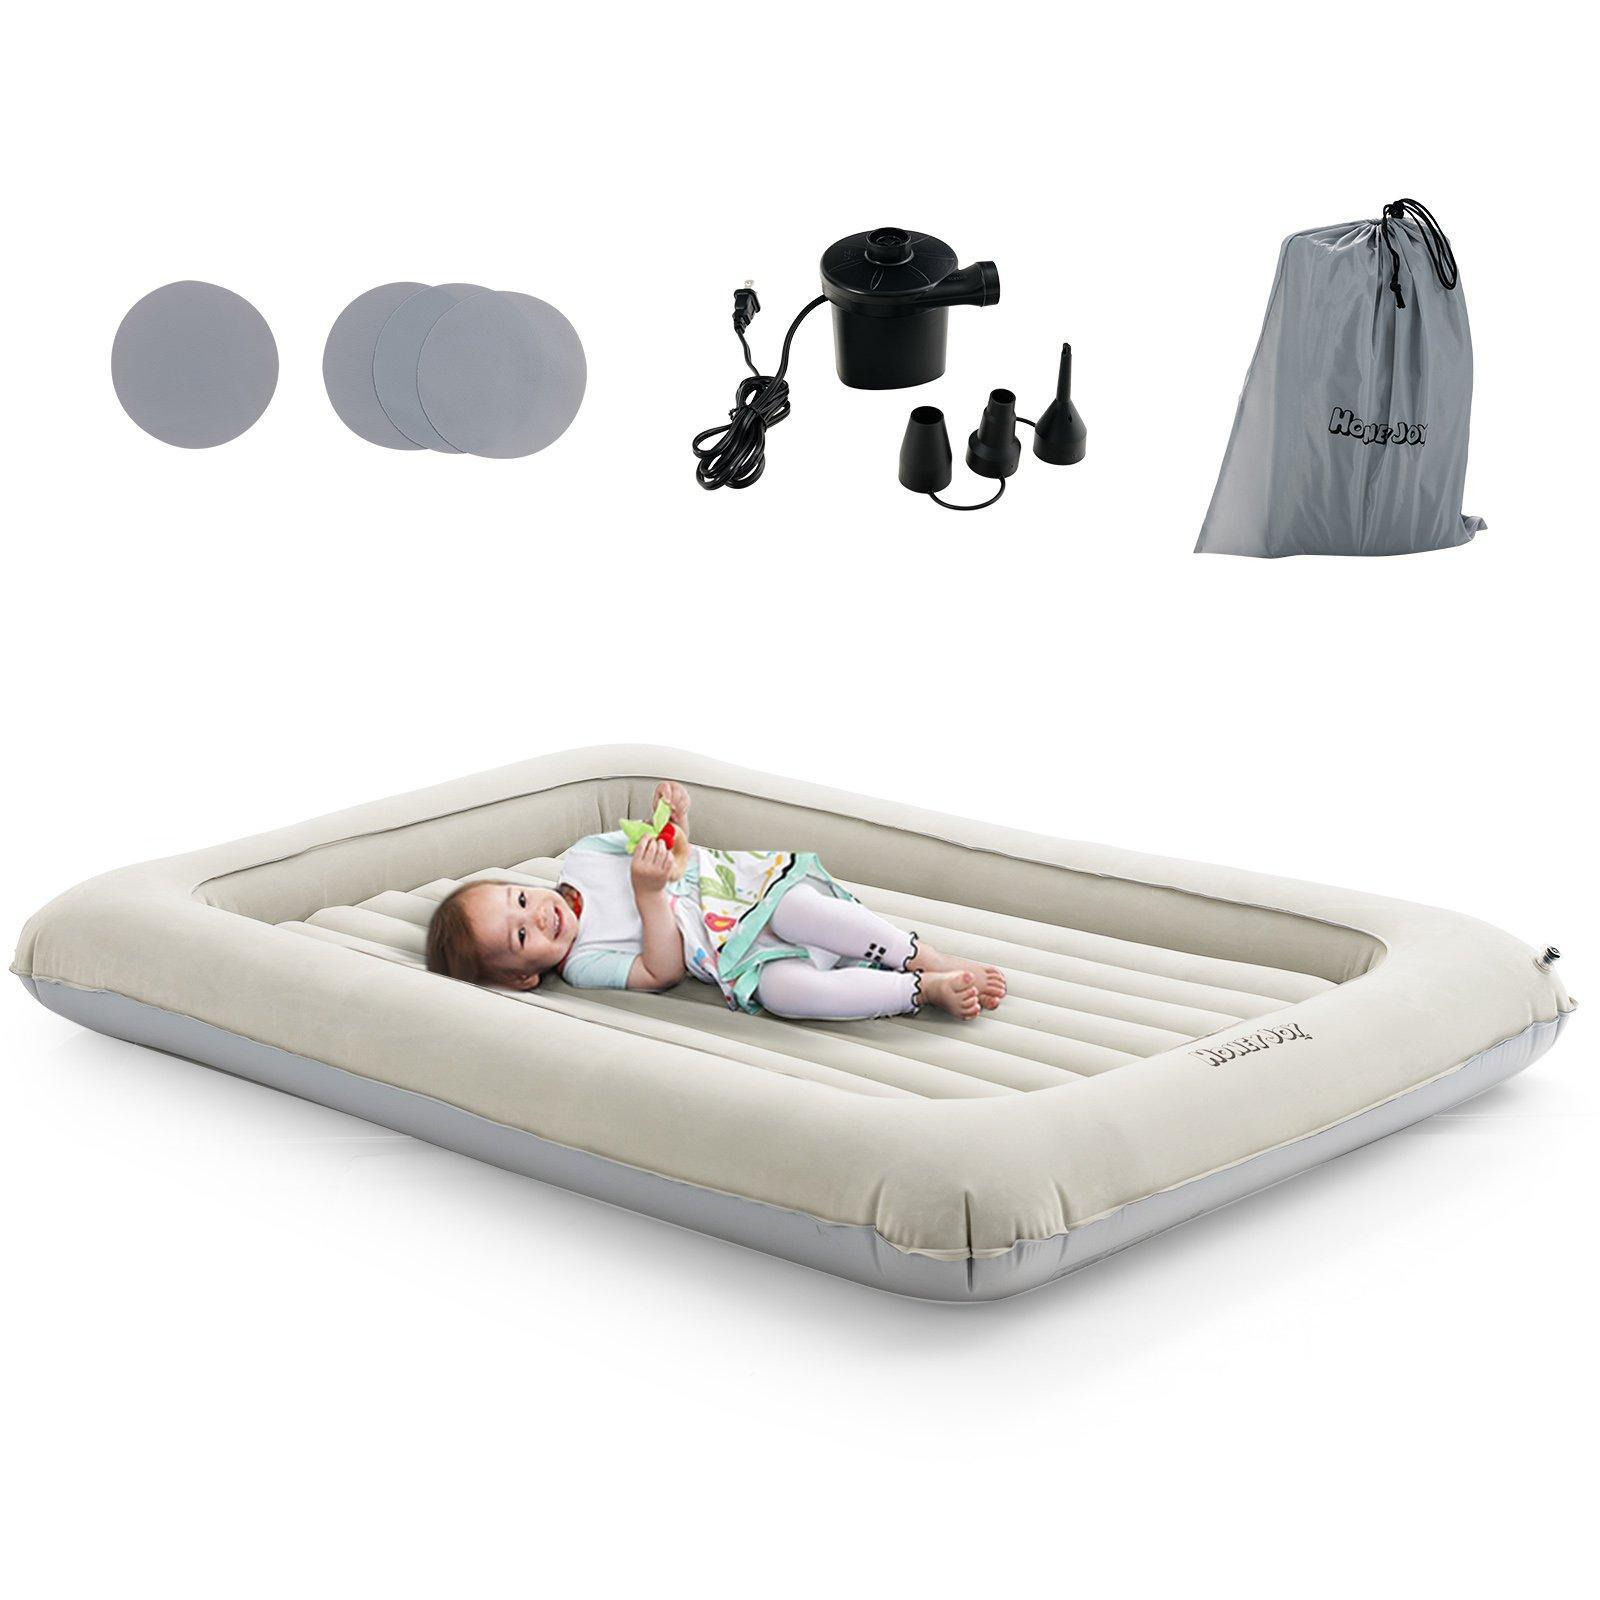 Inflatable Toddler Travel Bed Portable Kids Bed Kid Air Mattress - image 1